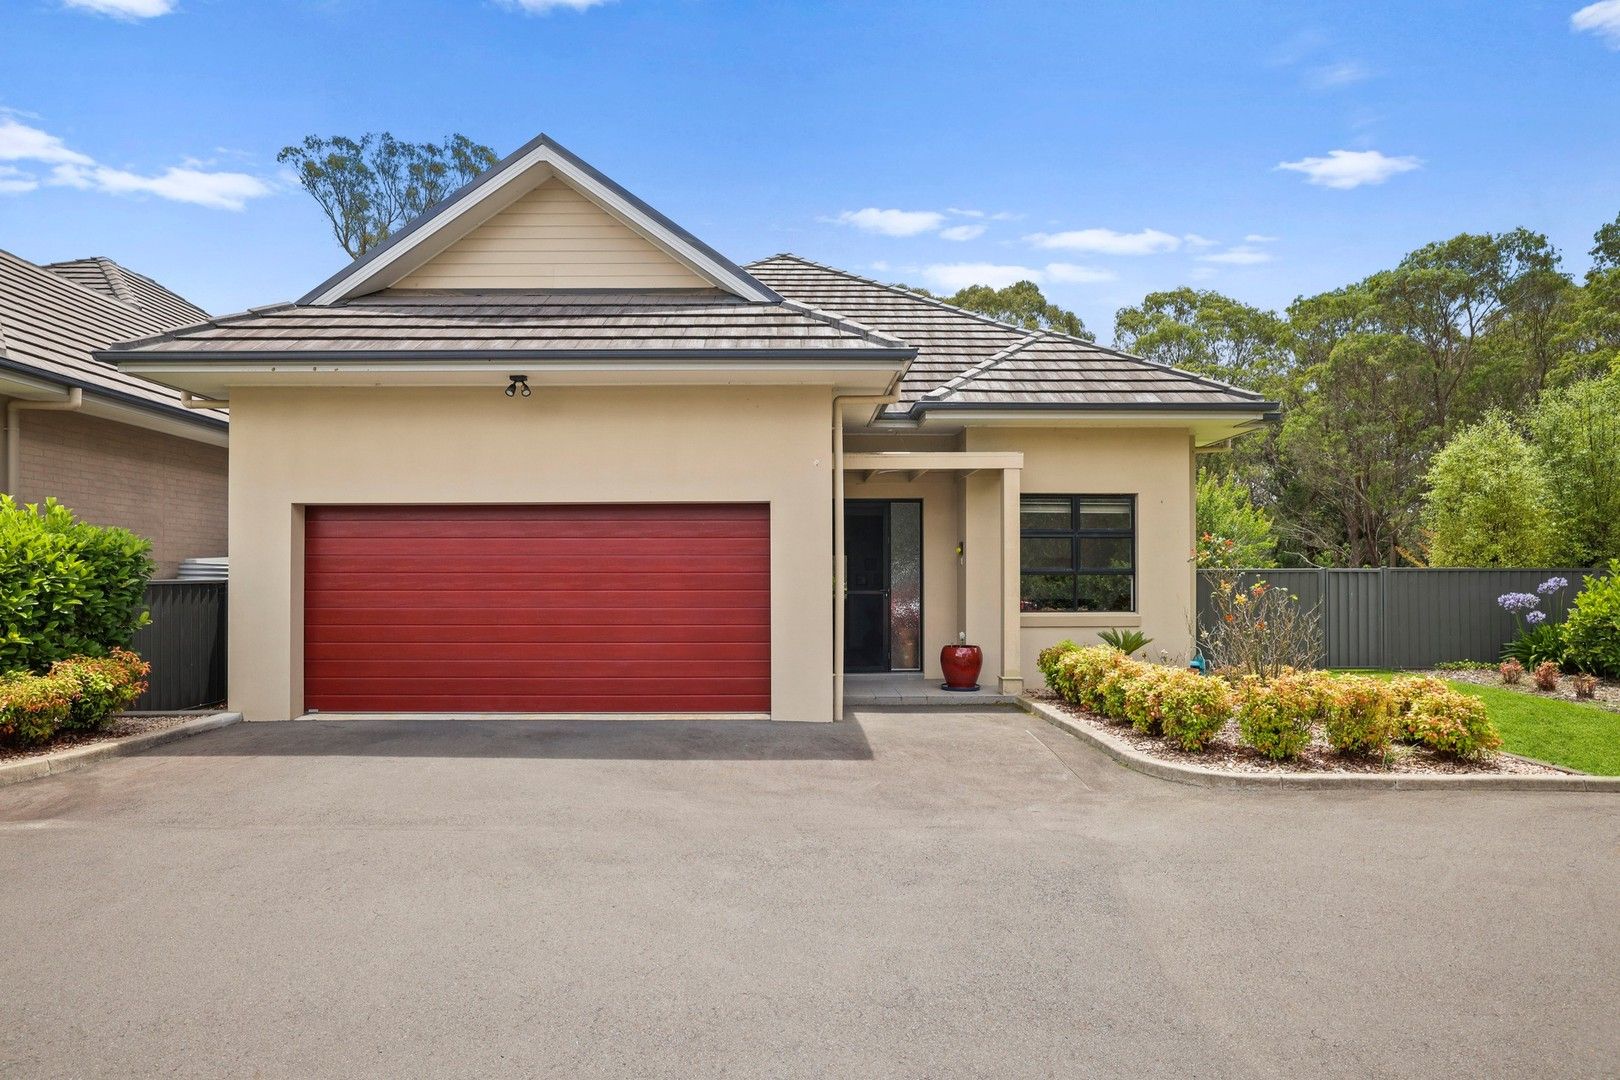 4 bedrooms Townhouse in 22/4-36 Colo Street MITTAGONG NSW, 2575